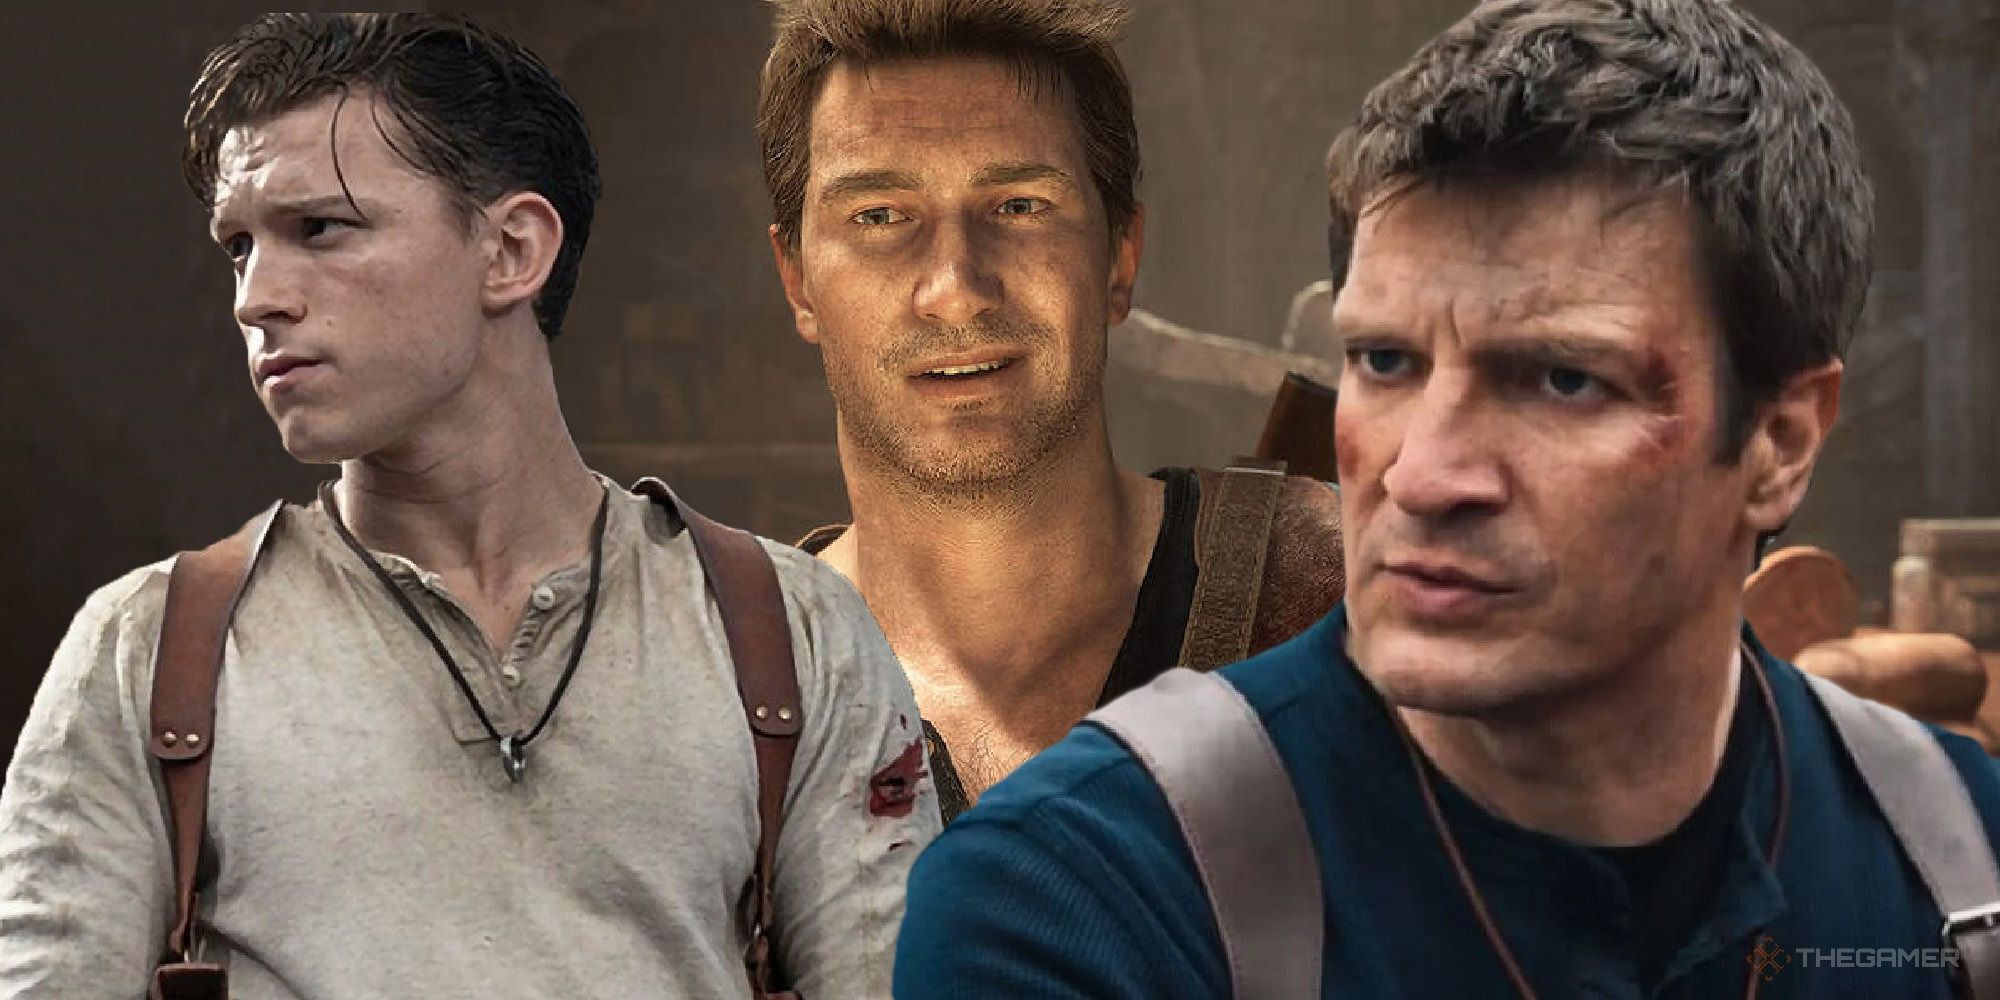 Tom Holland Becomes Nathan Drake in First Look at 'Uncharted' (Photo)